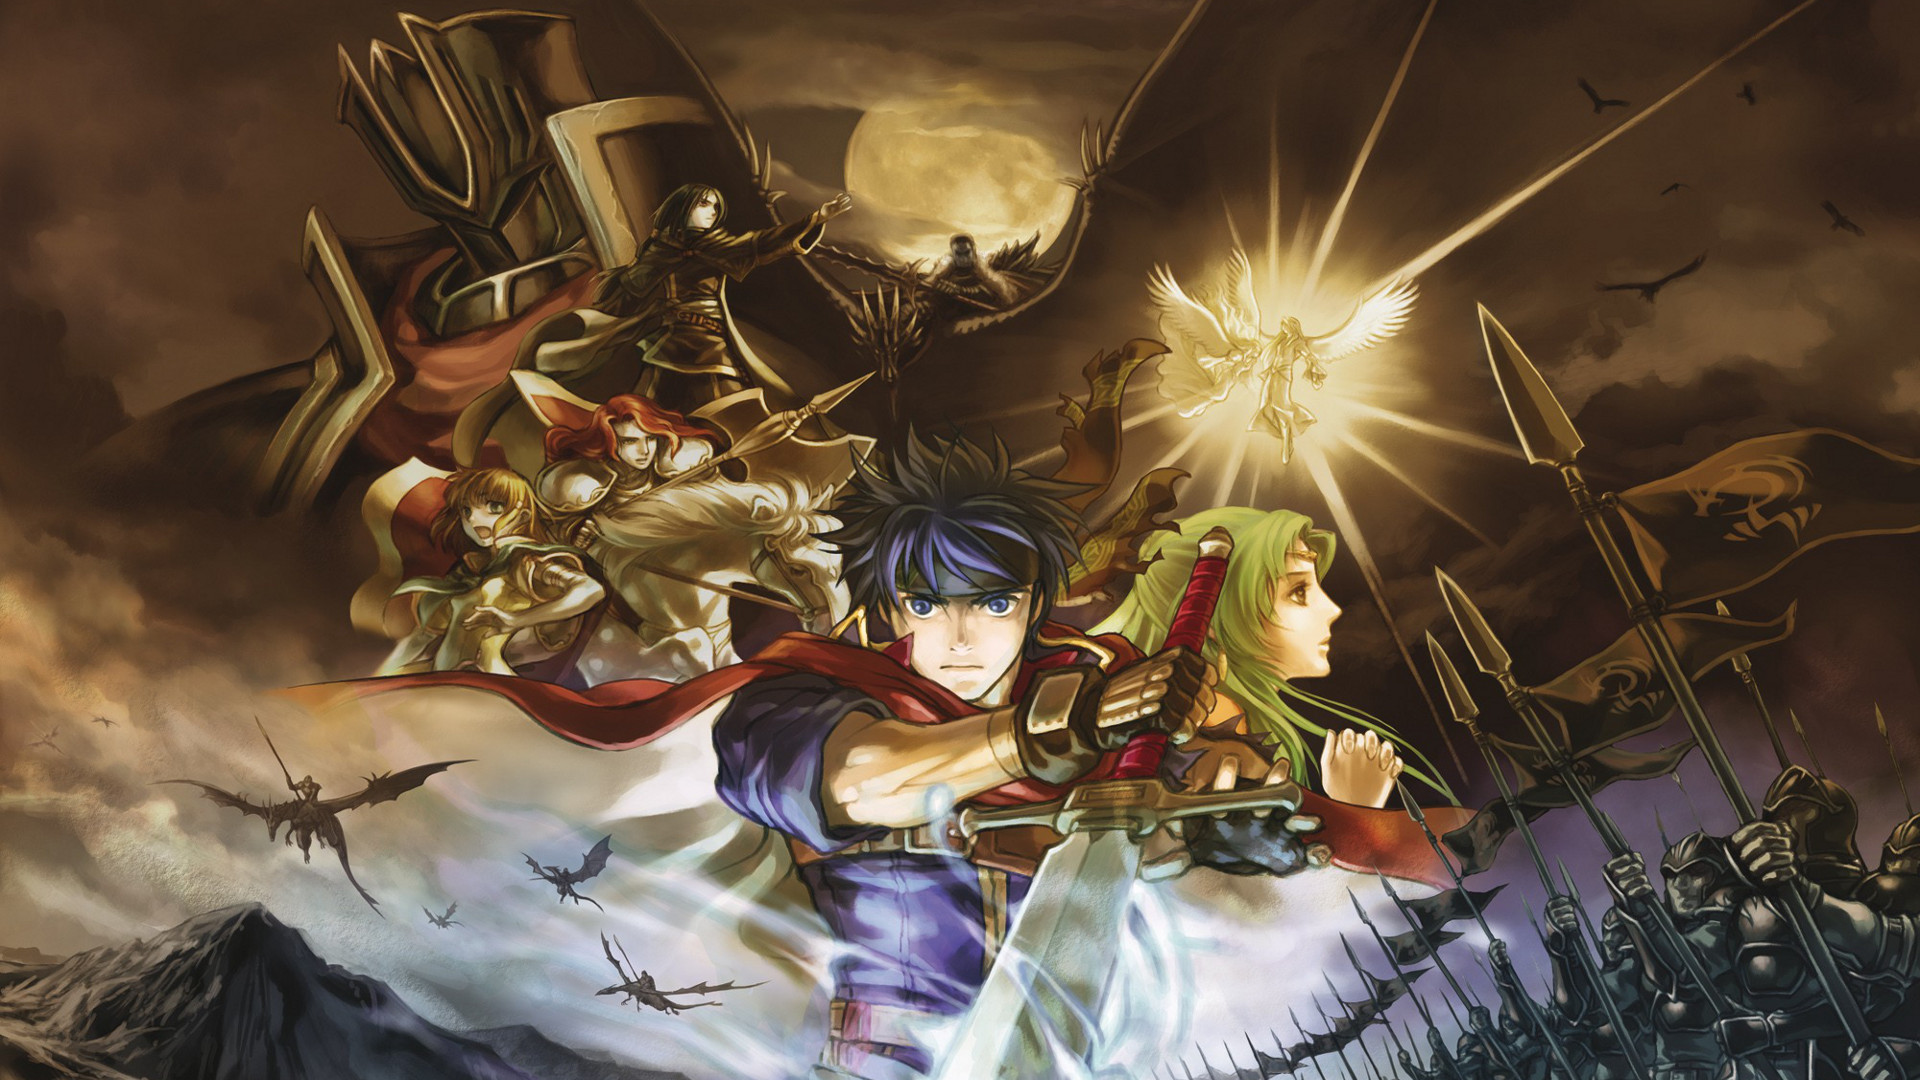 fire emblem pc game free download